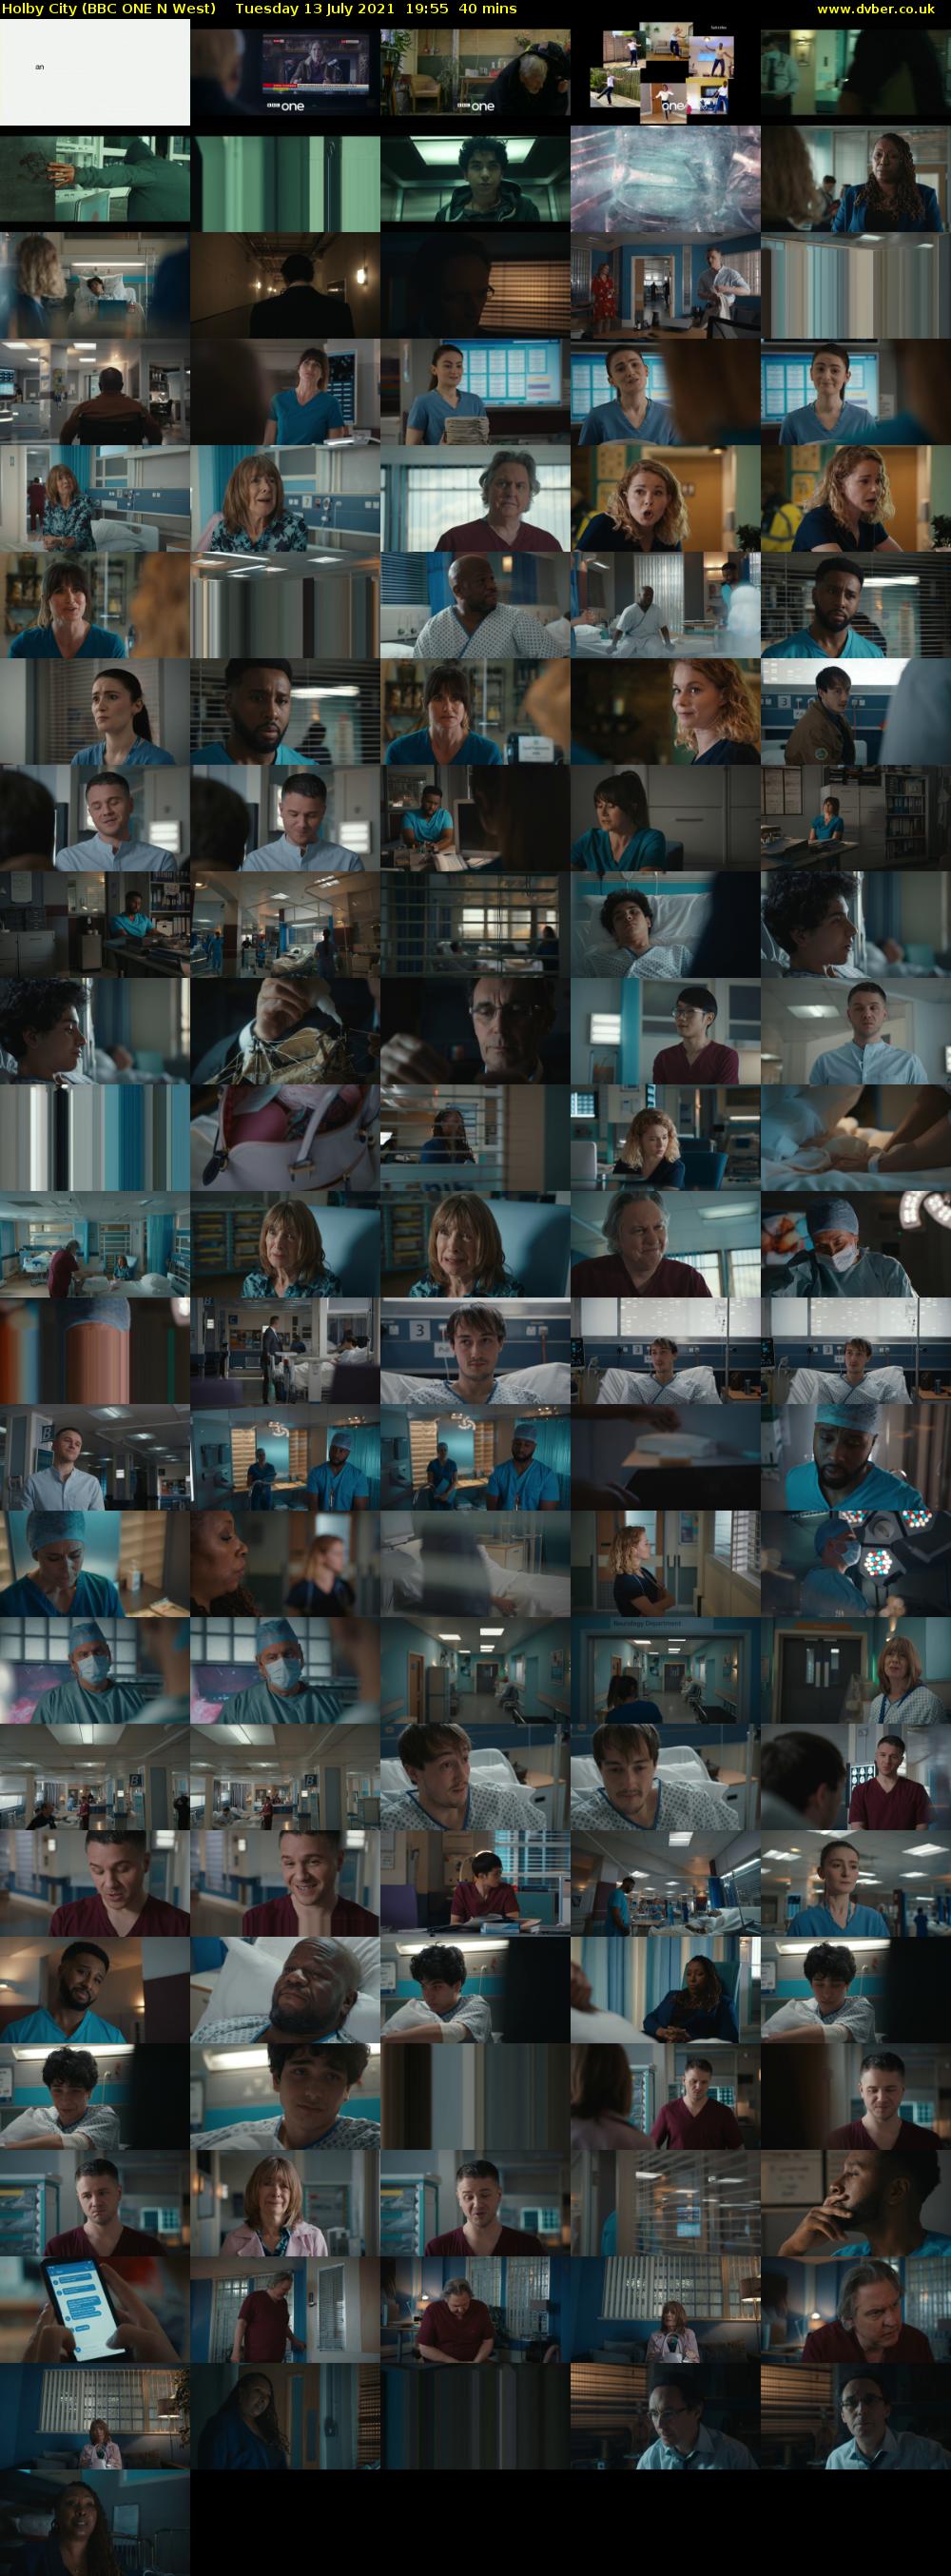 Holby City (BBC ONE N West) Tuesday 13 July 2021 19:55 - 20:35